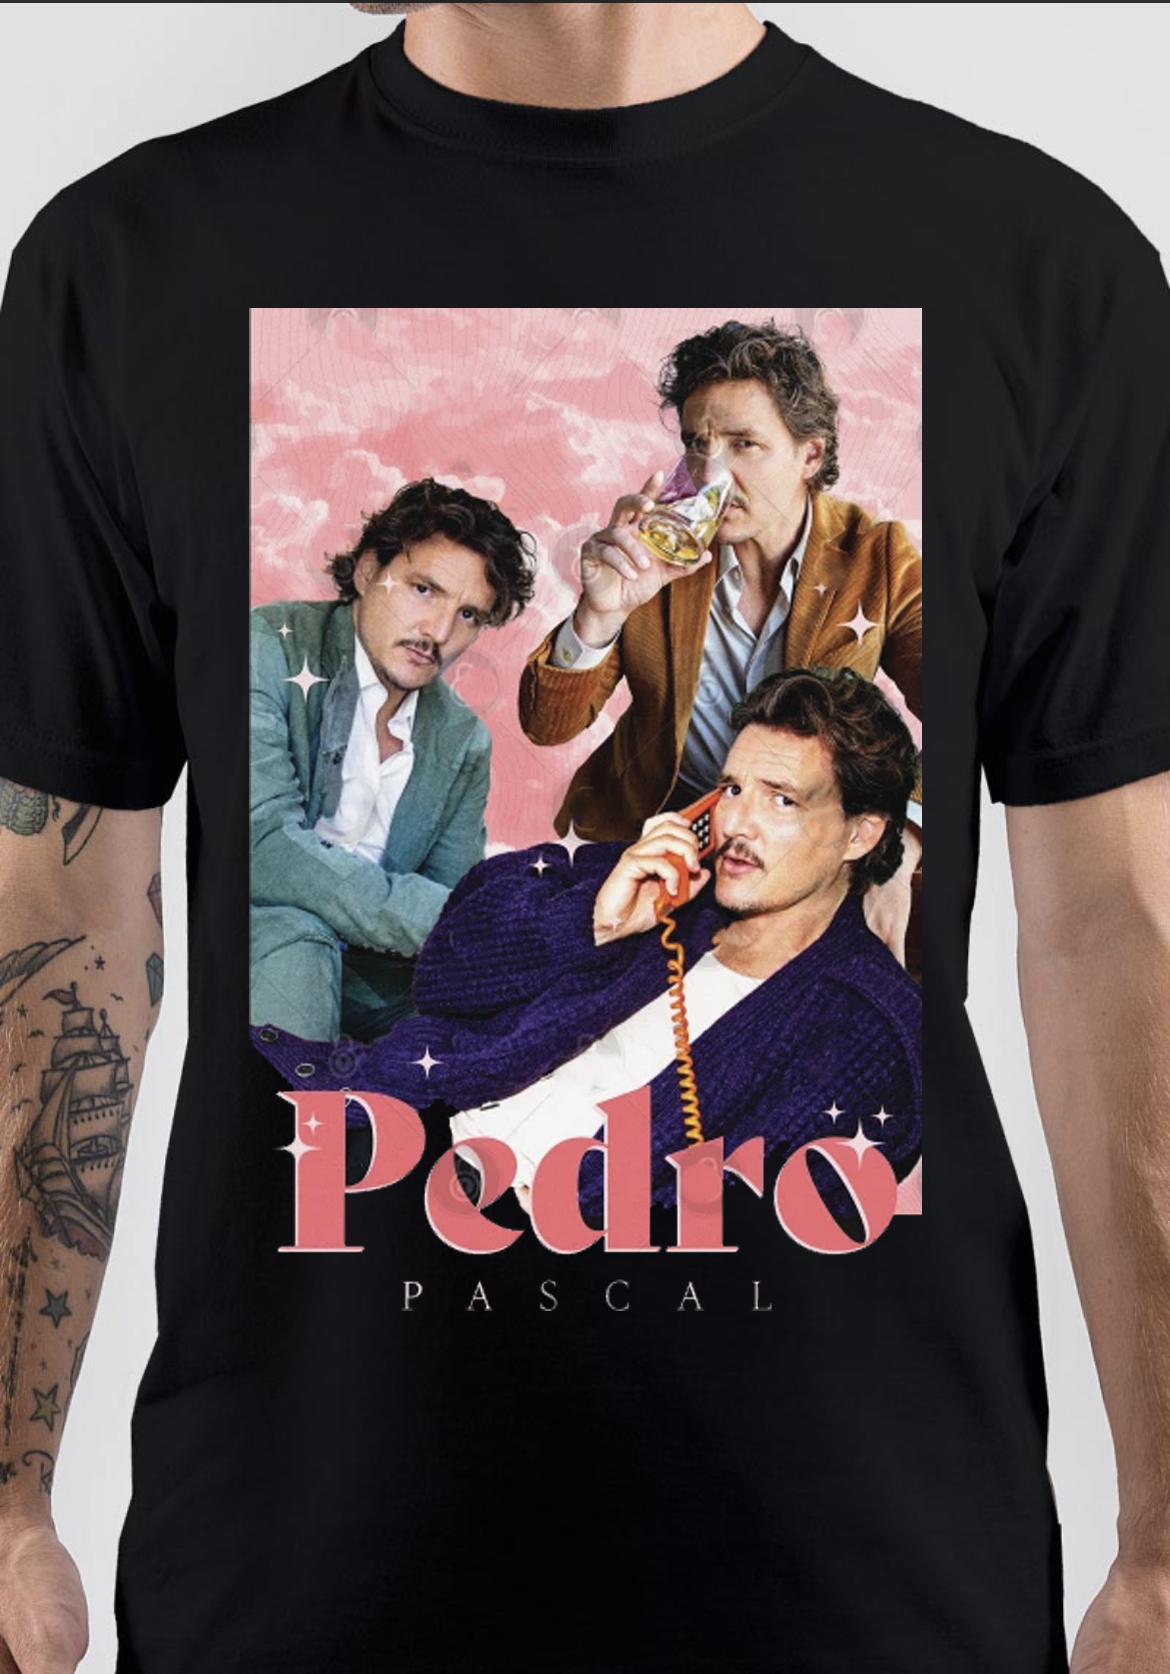 Pedro Pascal T-Shirt And Merchandise